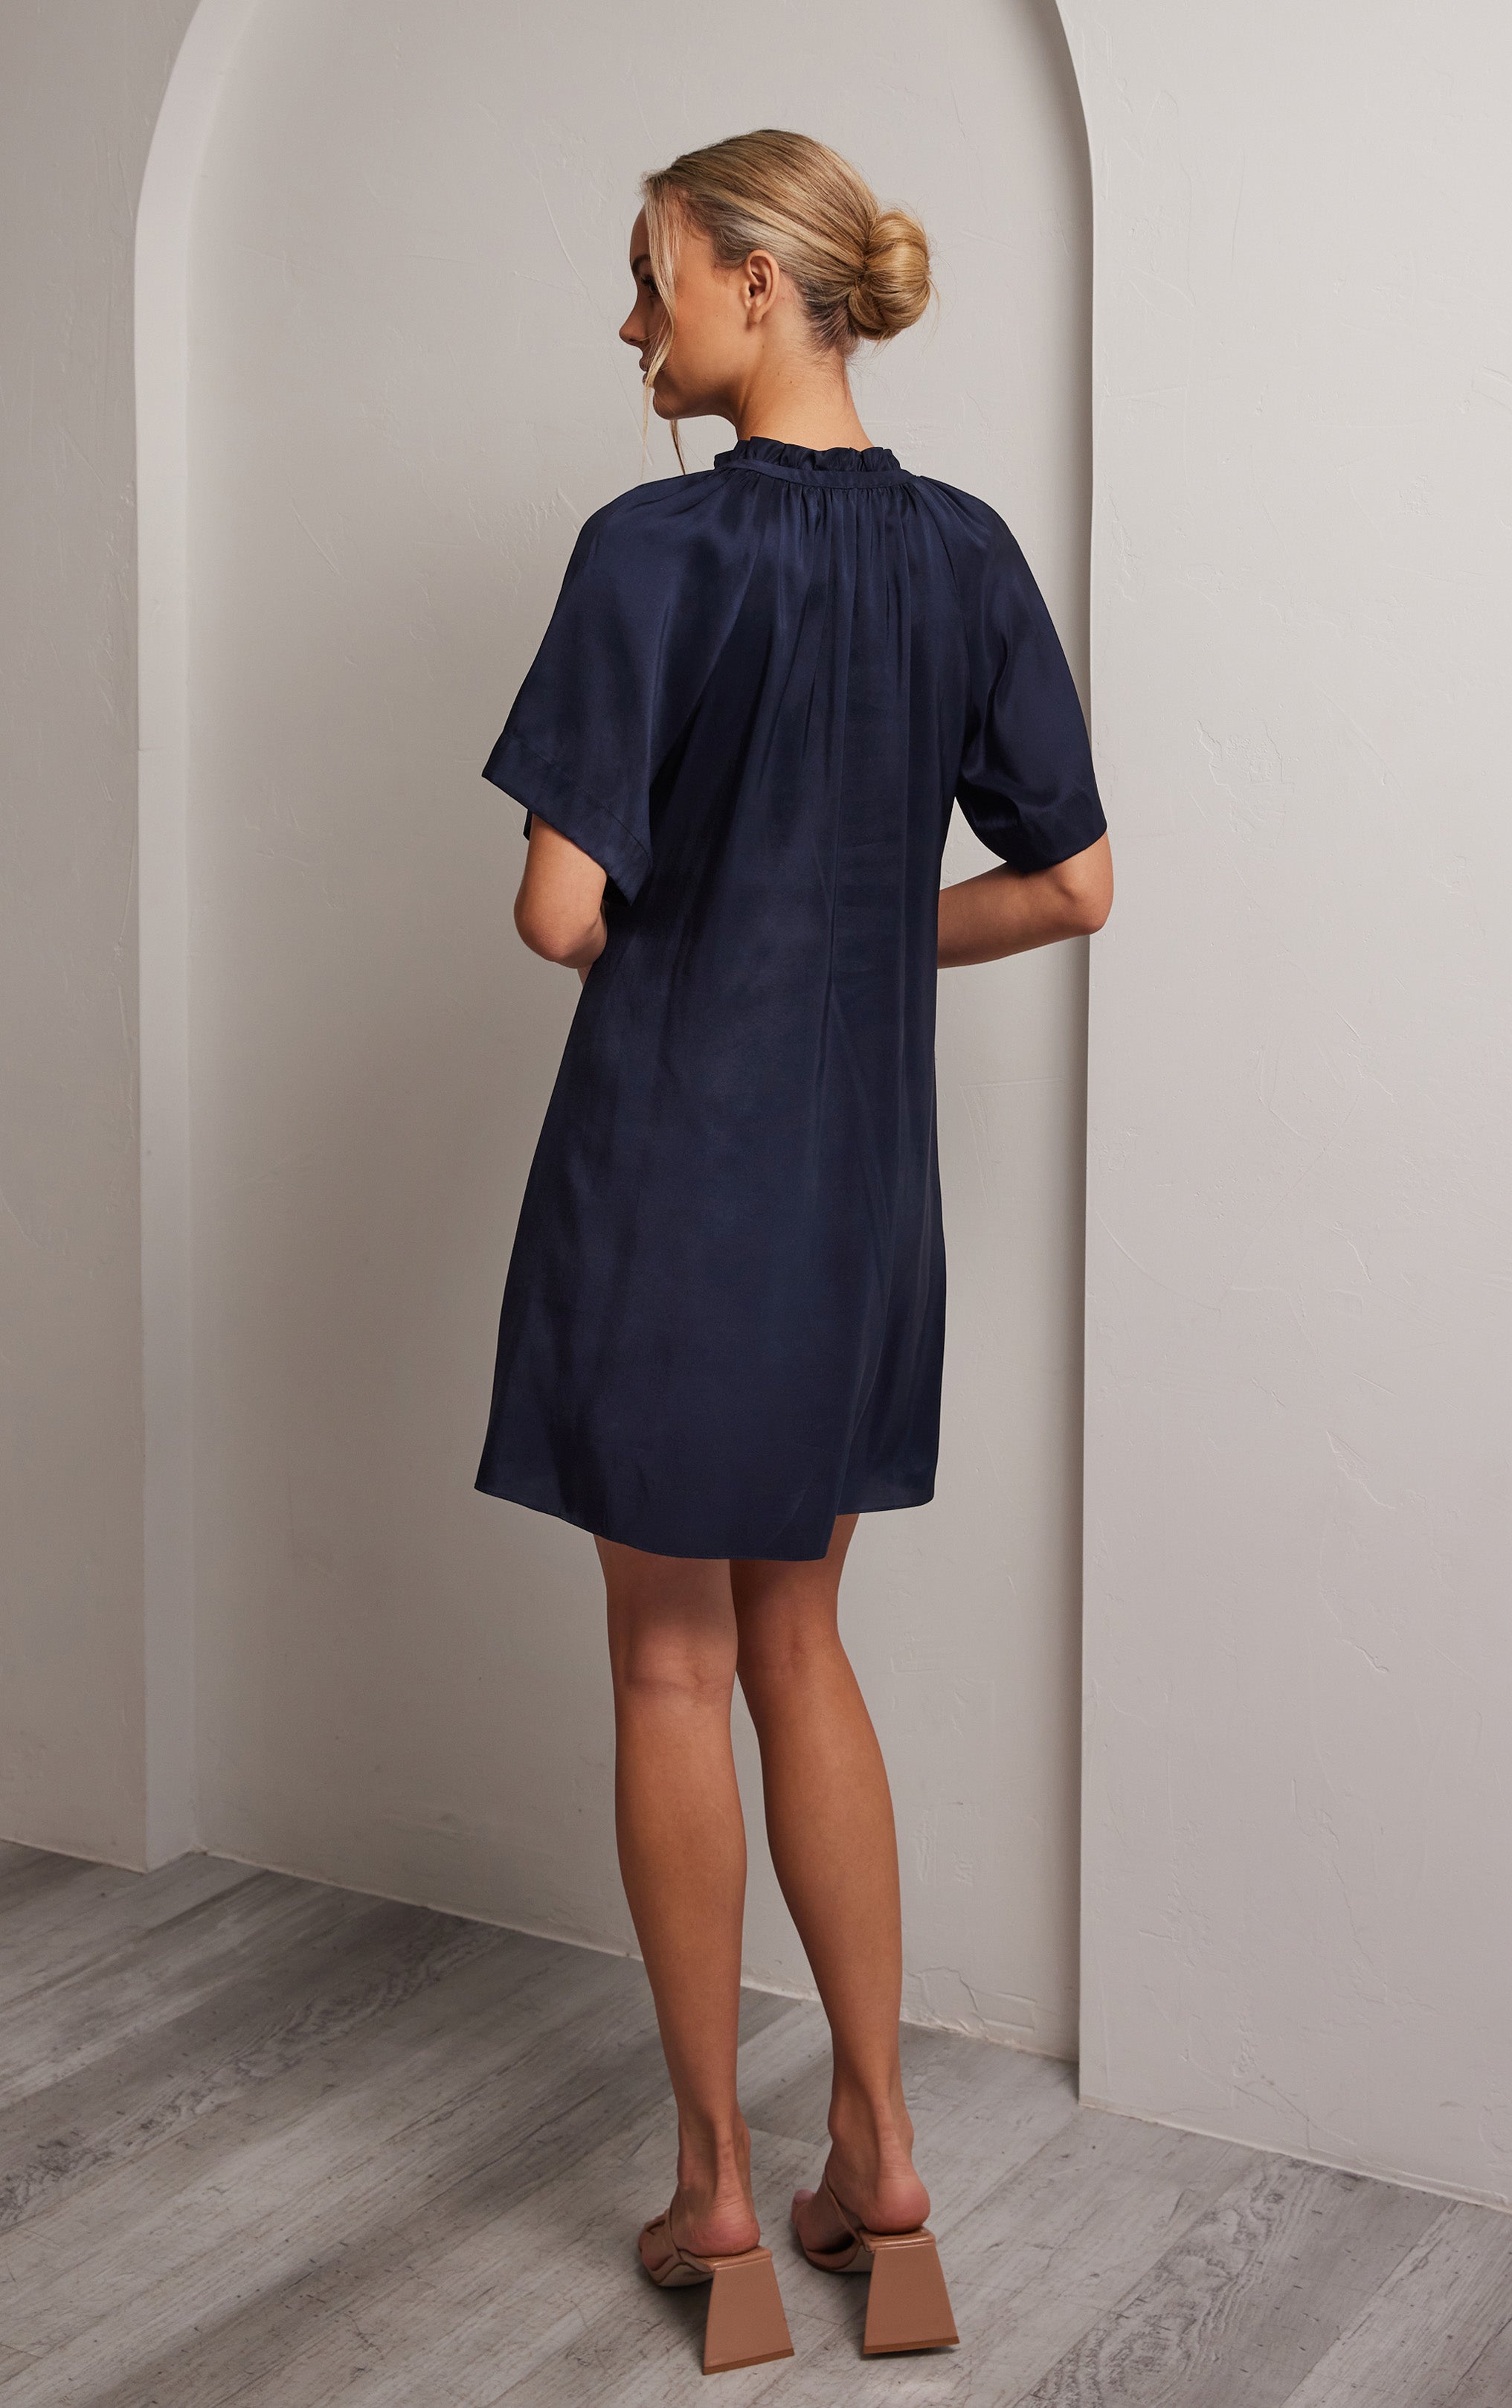 woman standing back view of navy short sleeved silk dress with ruffled neck and silhouette cut